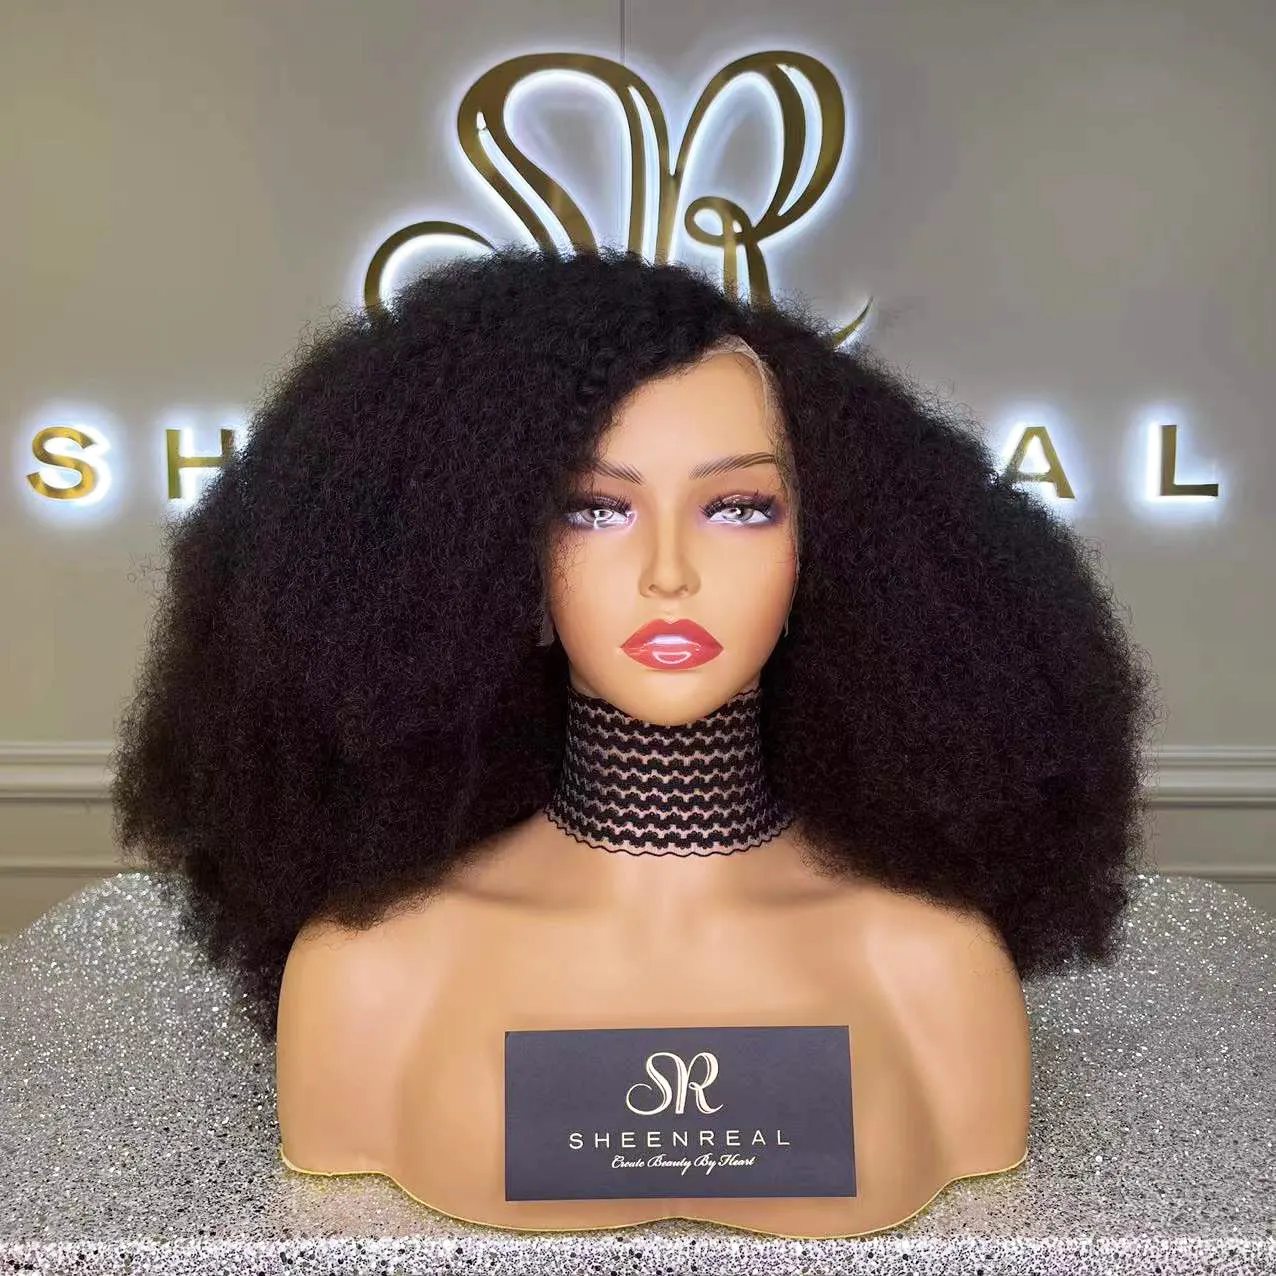 Full Density Afro Kinky Curly Human Hair Wigs Natural Black 3C Curl 360 Full Lace Human Hair Wig For Women